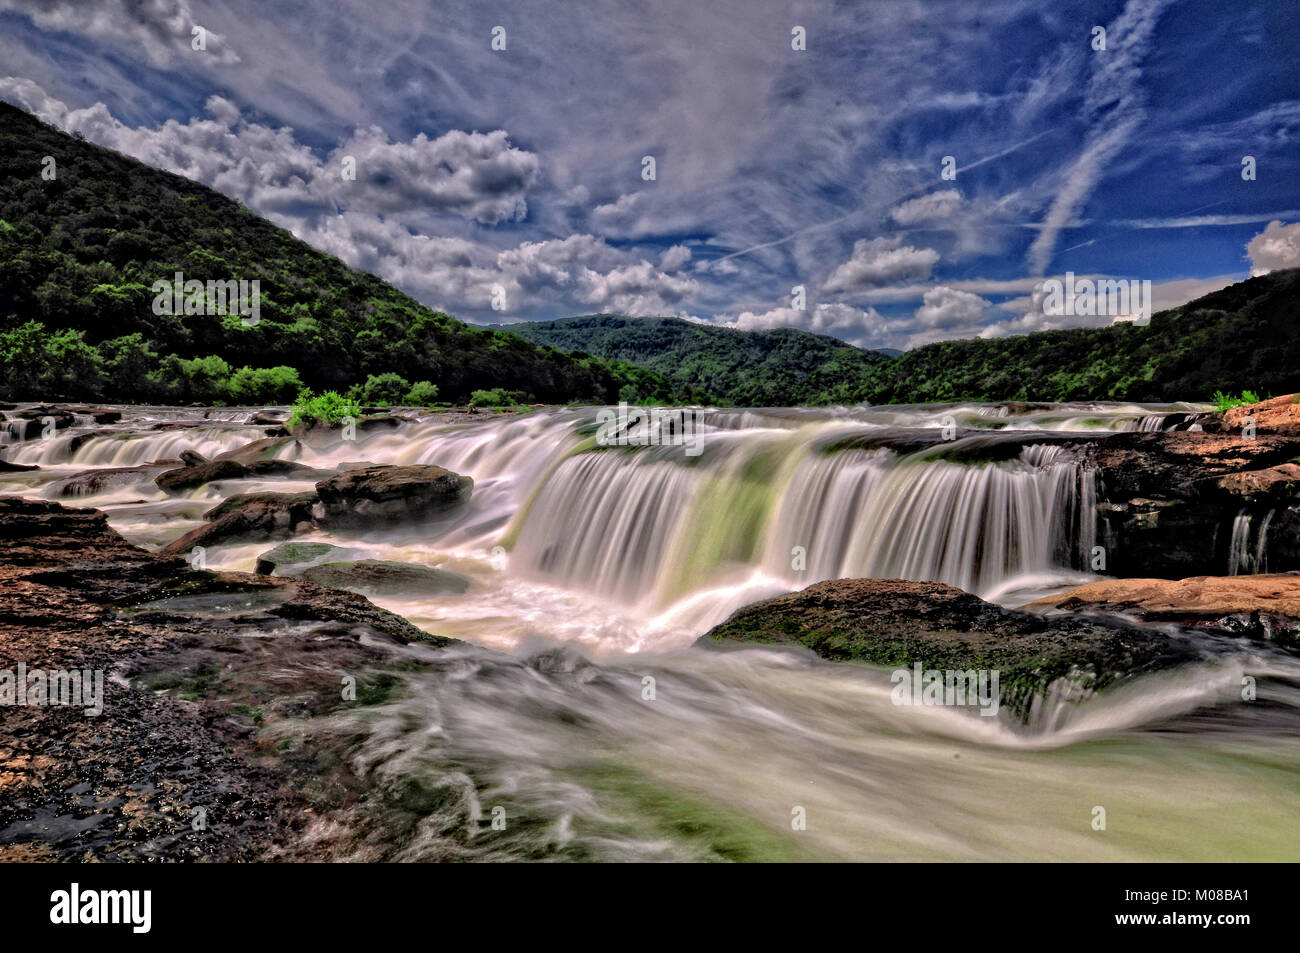 Iconic Sandstone Falls of the New River Gorge West Virginia Stock Photo